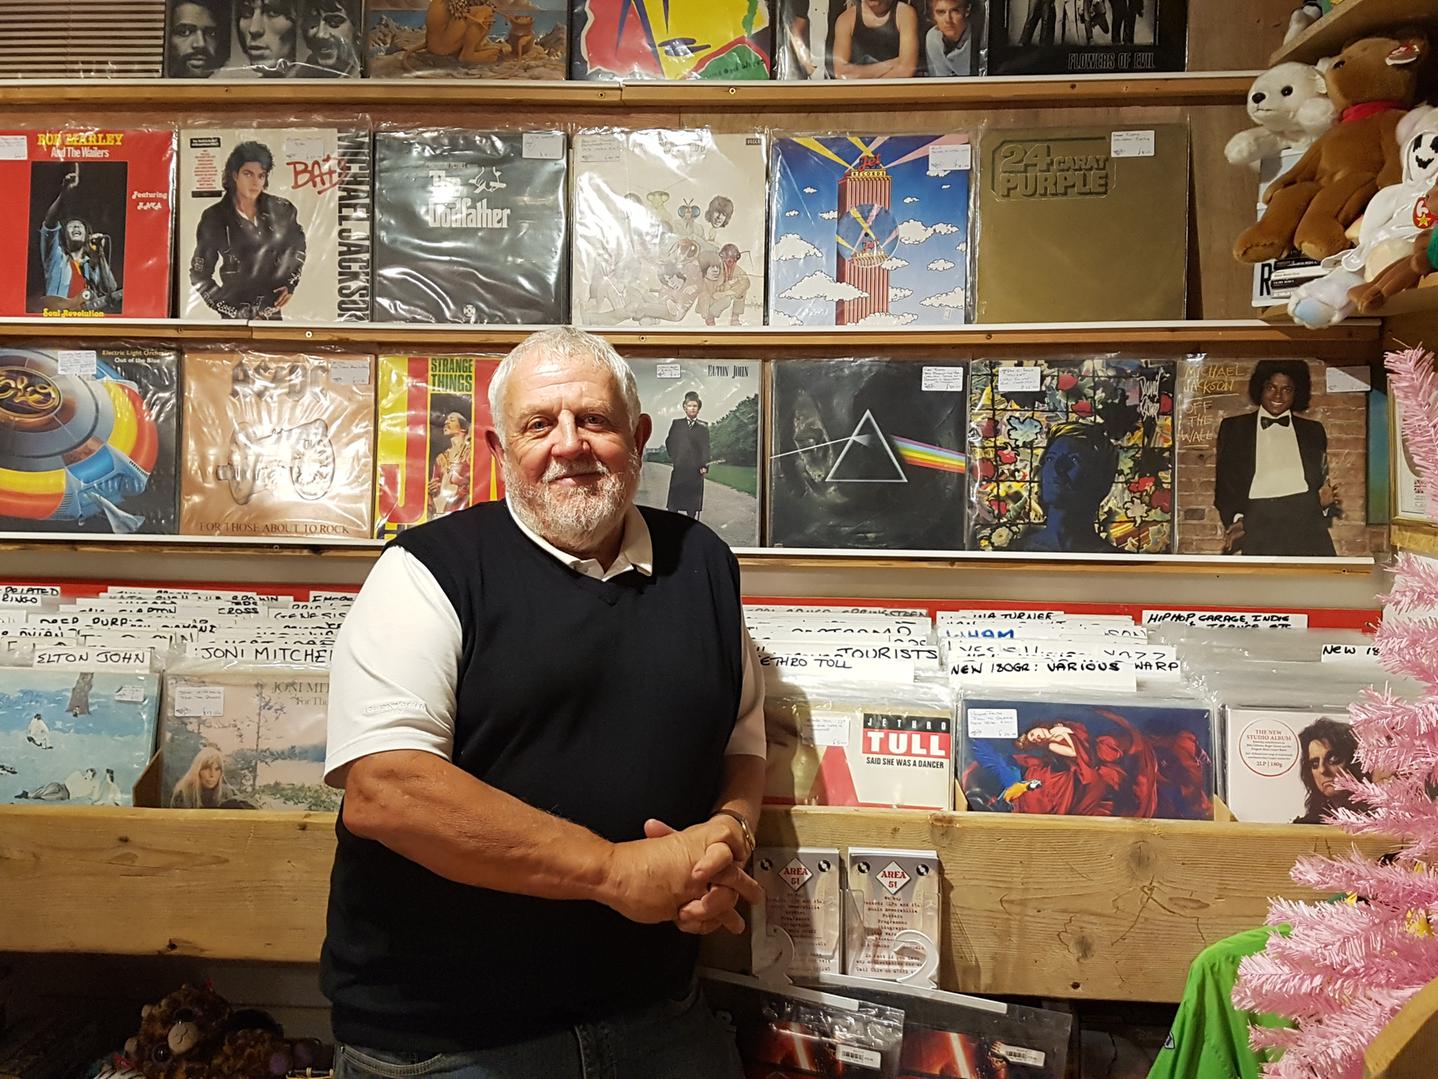 Chiv stocks vinyl, Star Wars collectors items and Beanie Babies. He said vinyl was having a resurgence and is now outselling CDs. Chiv has a dedicated funk and soul section which would make the perfect present for any Northern Soul fans.